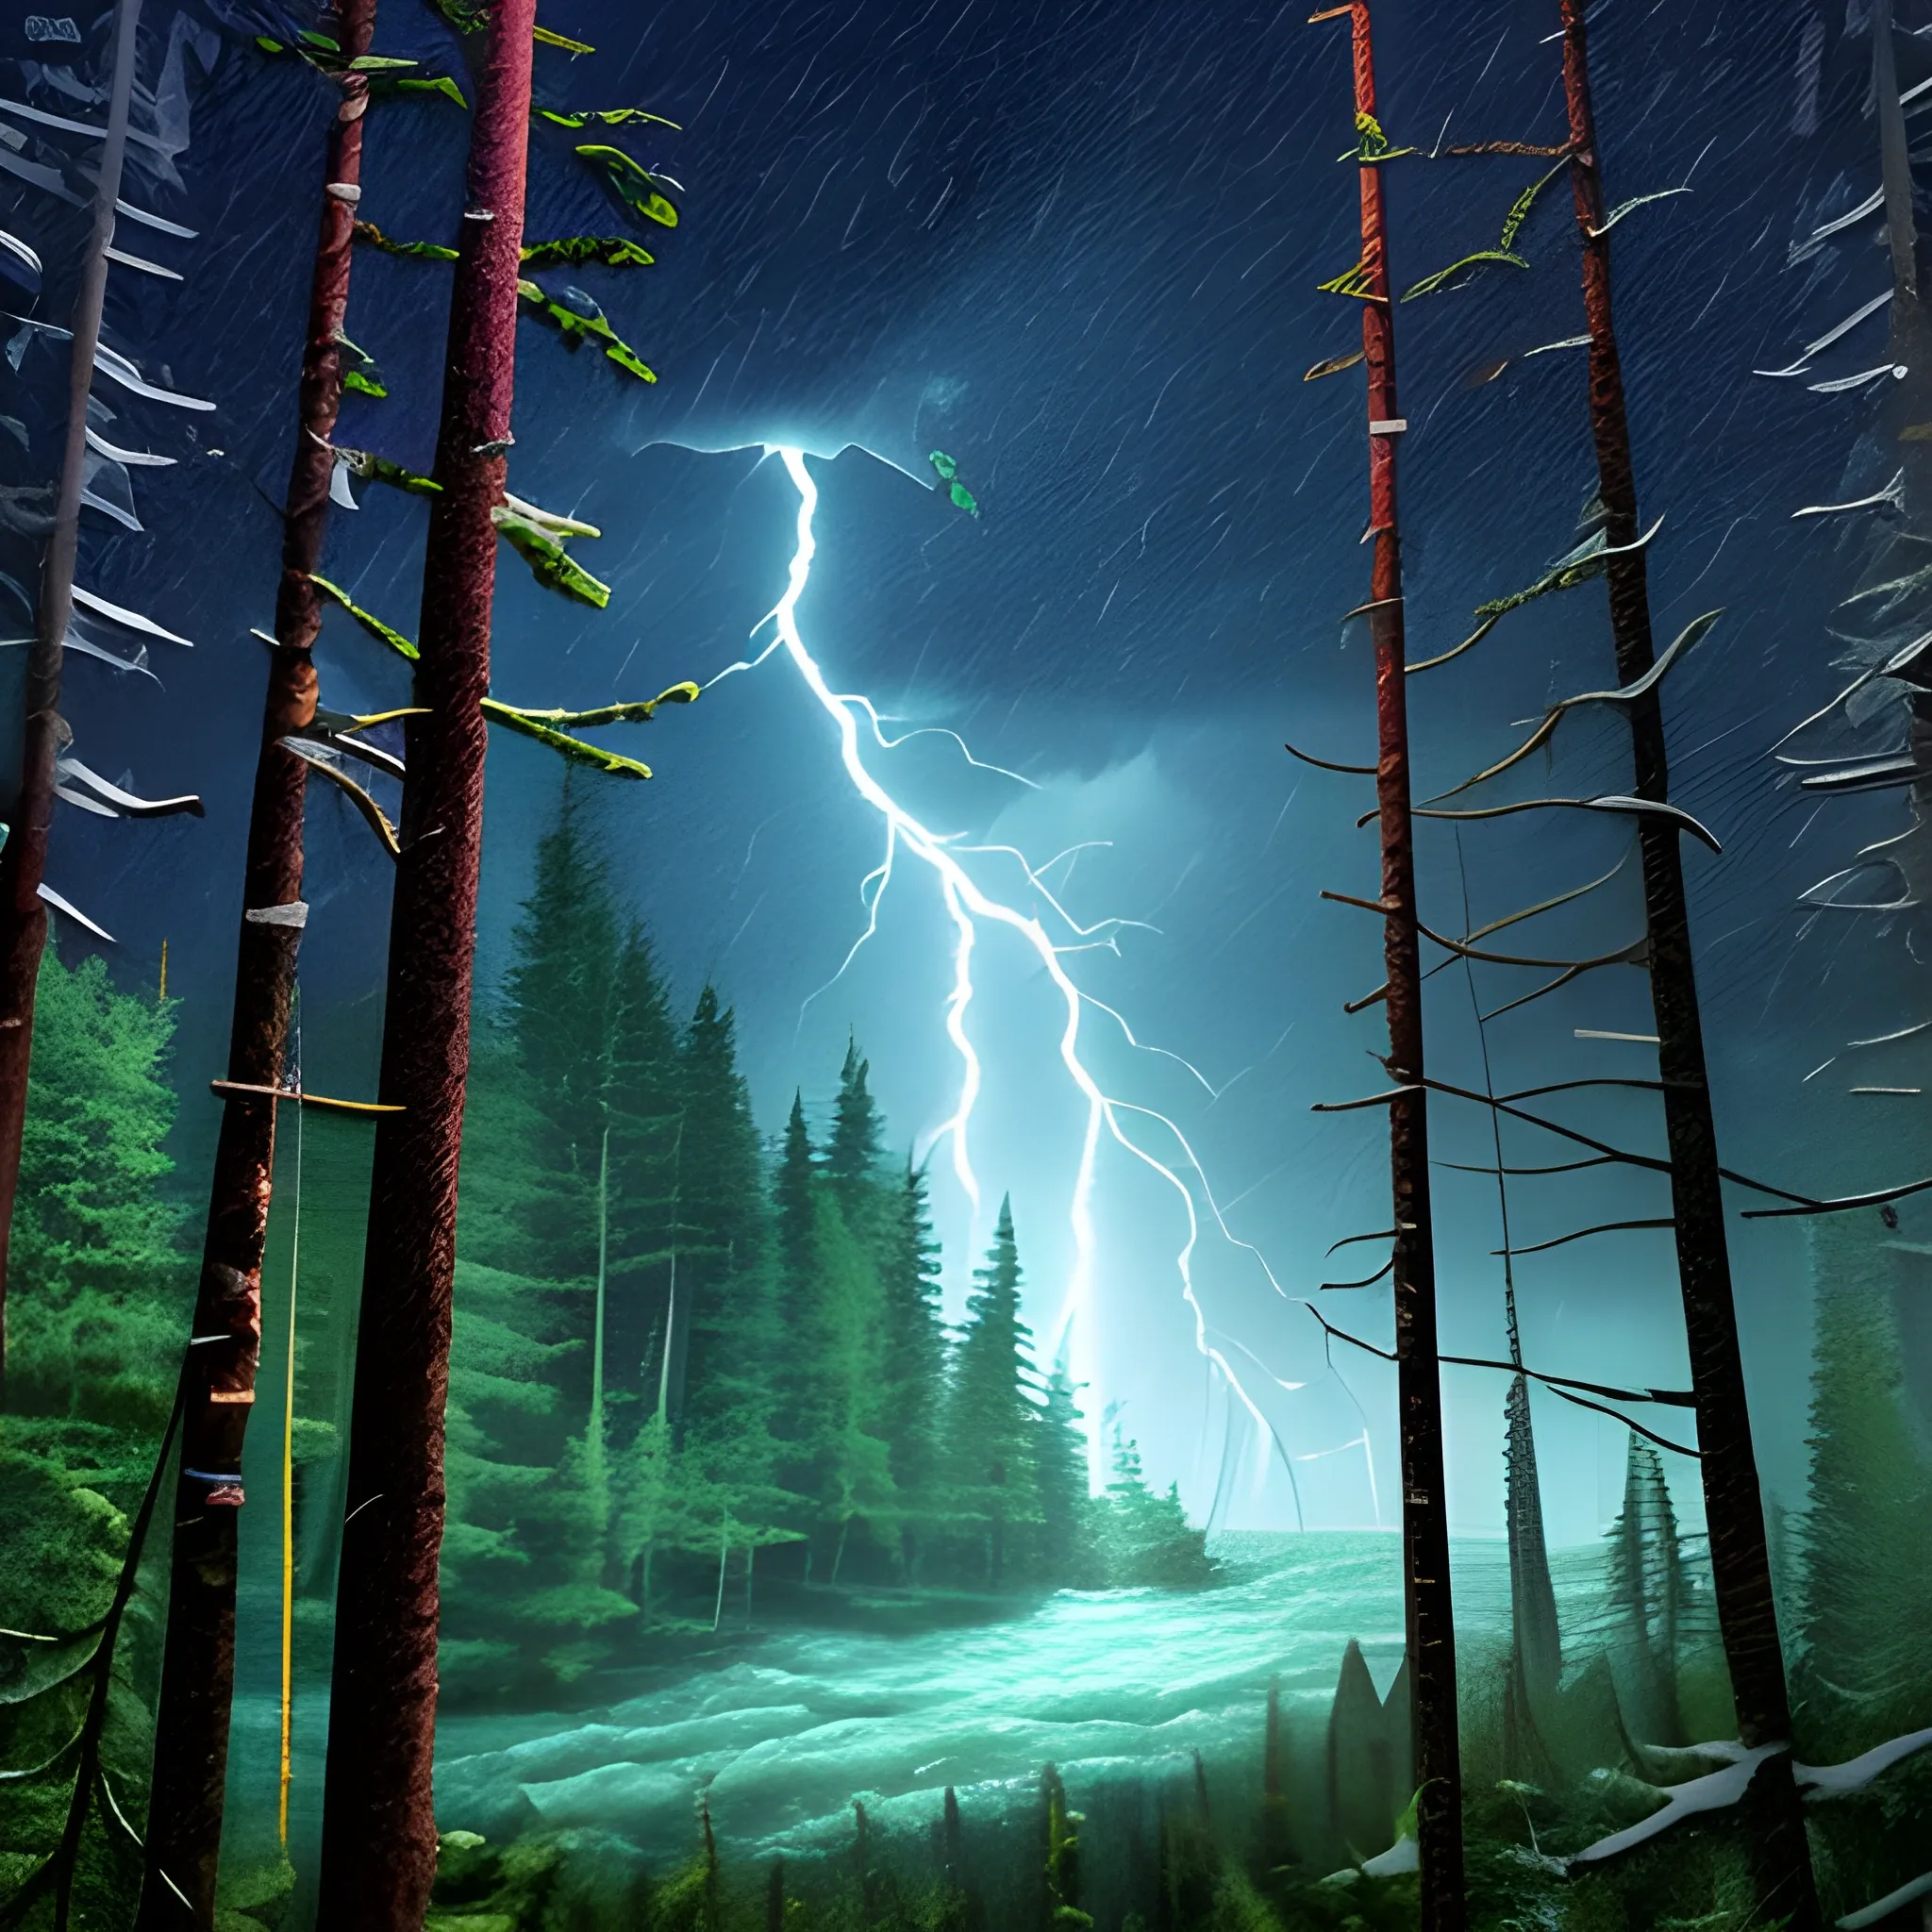 It is night and a cabin in the middle of the forest is hit by a strong storm. In the small window you can see a faint light coming from inside. The trees surround it and sway from the force of the storm., Water Color